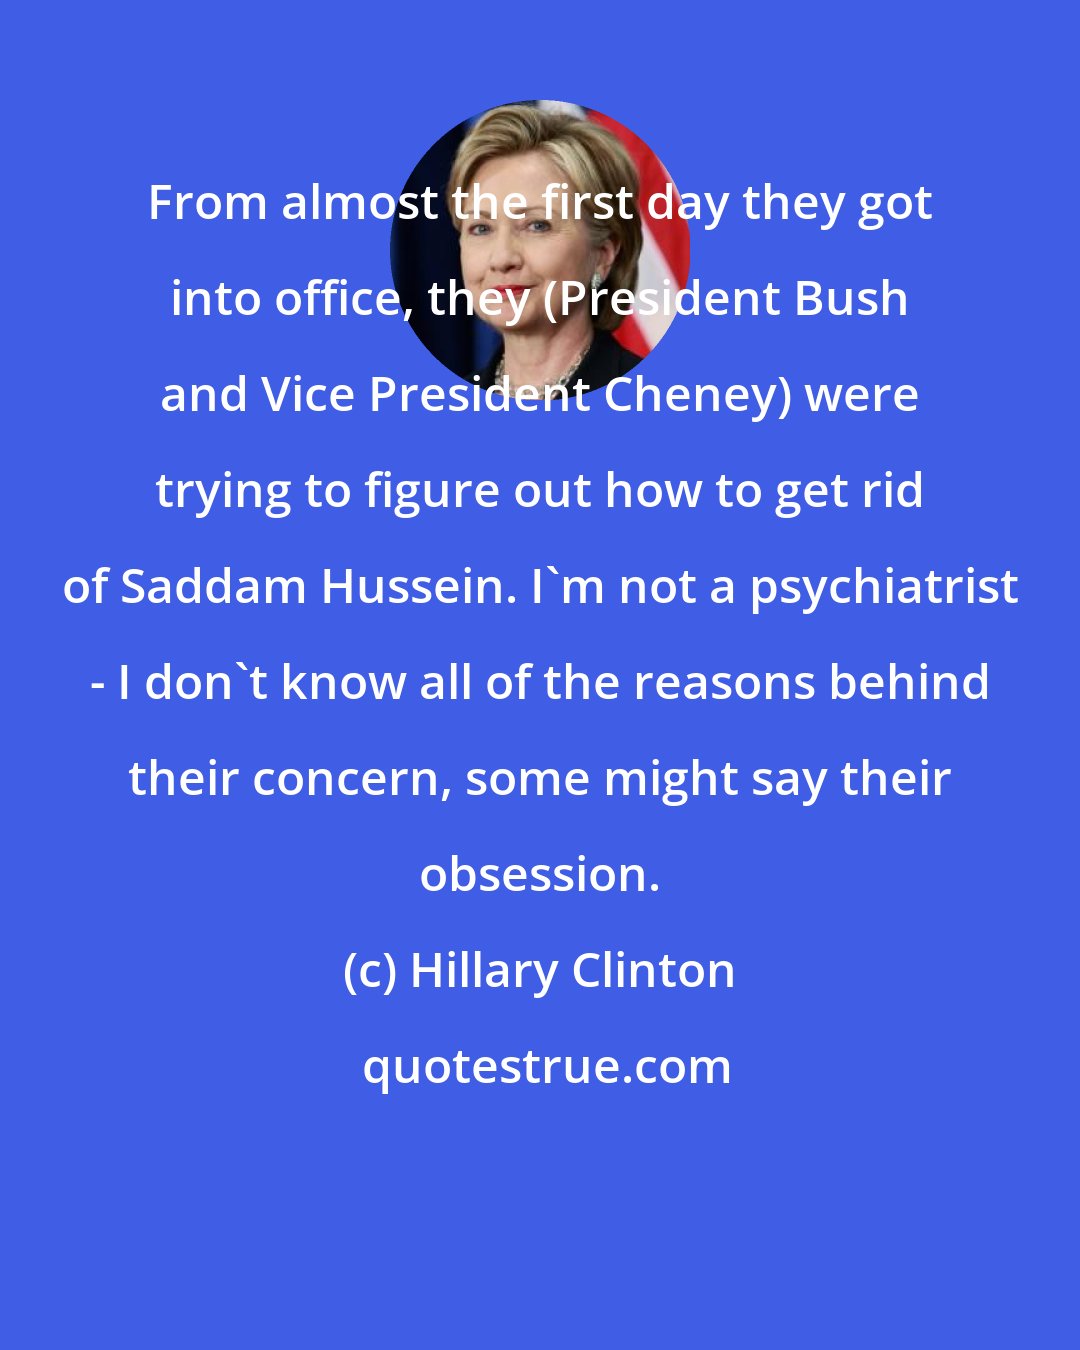 Hillary Clinton: From almost the first day they got into office, they (President Bush and Vice President Cheney) were trying to figure out how to get rid of Saddam Hussein. I'm not a psychiatrist - I don't know all of the reasons behind their concern, some might say their obsession.